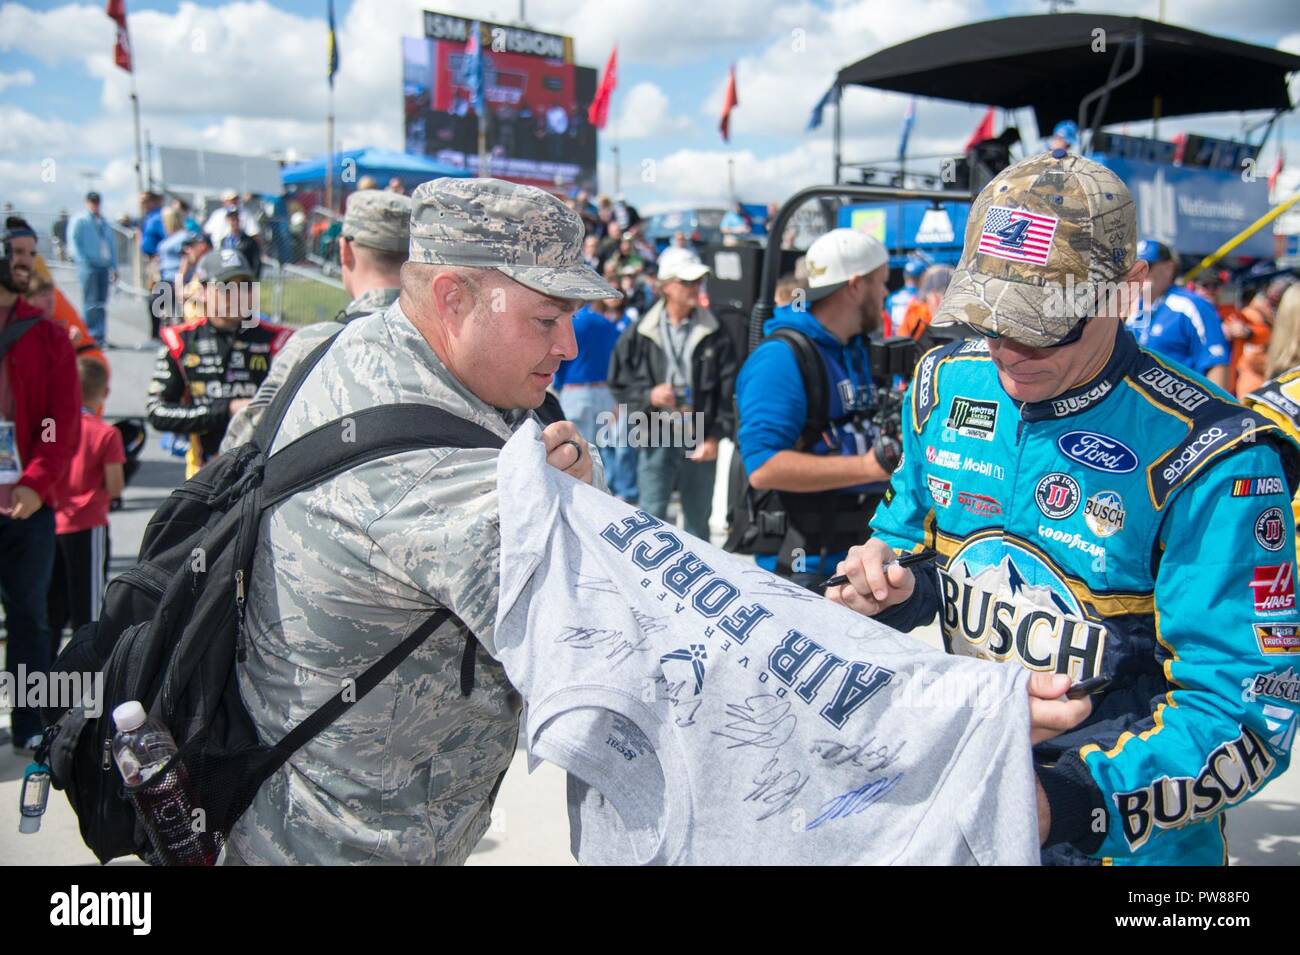 Kevin Harvick, driver of the No. 4 Ford Fusion, autographs a t-shirt for Tech. Sgt. Steven Auer, 436th Operations Support Squadron air traffic control ops supervisor, before the Apache Warrior 400 race Oct. 1, 2017, at Dover International Speedway, Dover, Del. Auer was a participant of the Troops to Tracks program, which treats service members, veterans and military families to special VIP access at NASCAR races. Stock Photo